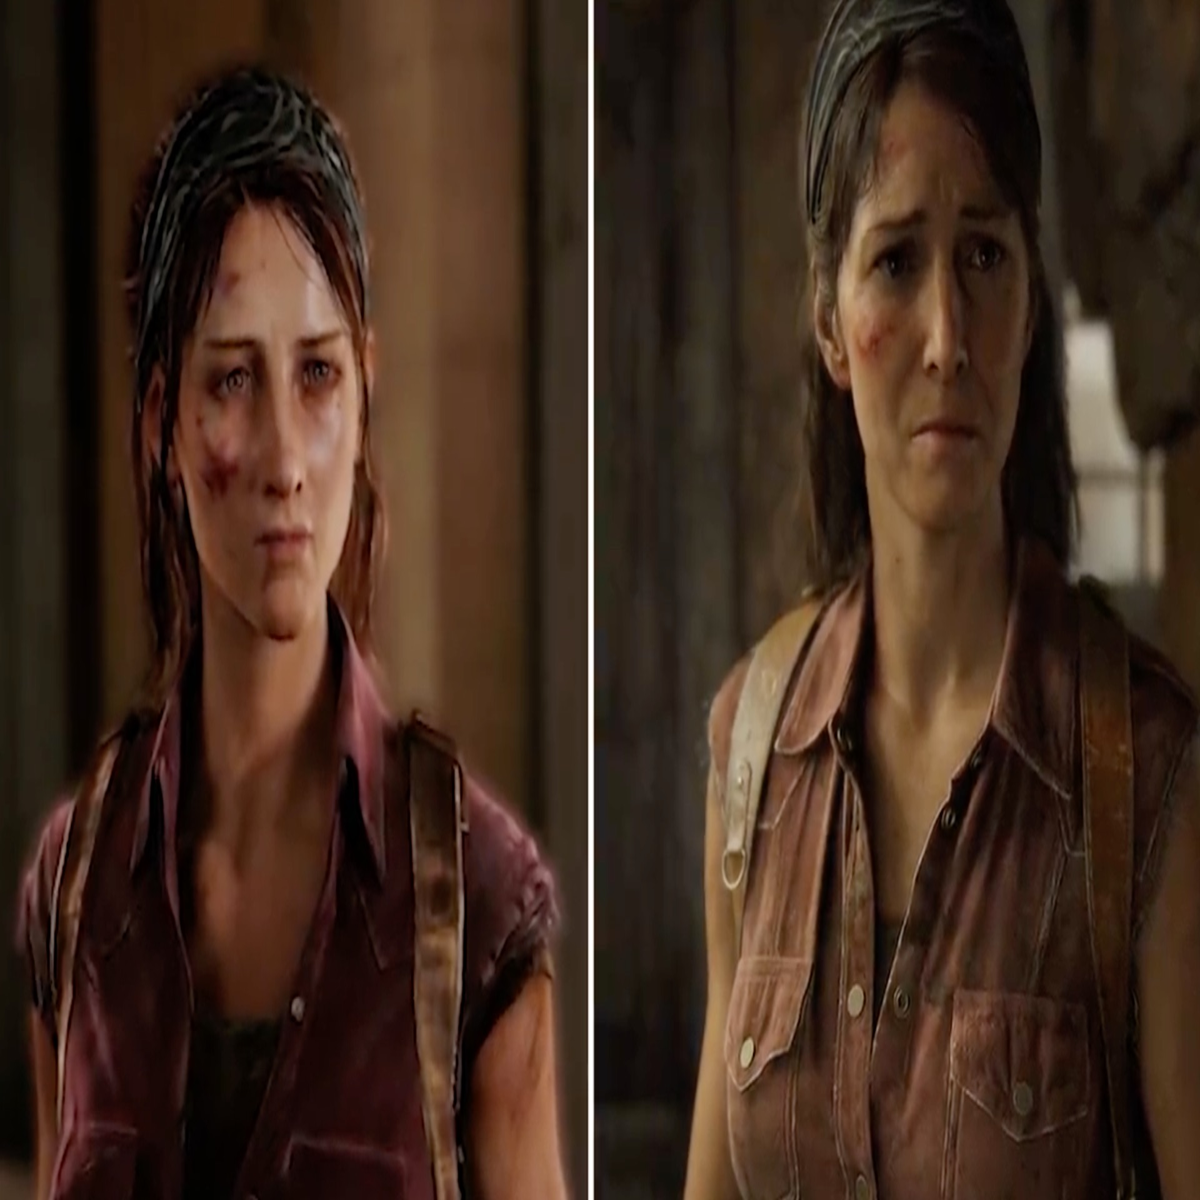 The Game Awards on X: Who do you think should be cast as Abby in Season 2  of #TheLastOfUs ?  / X